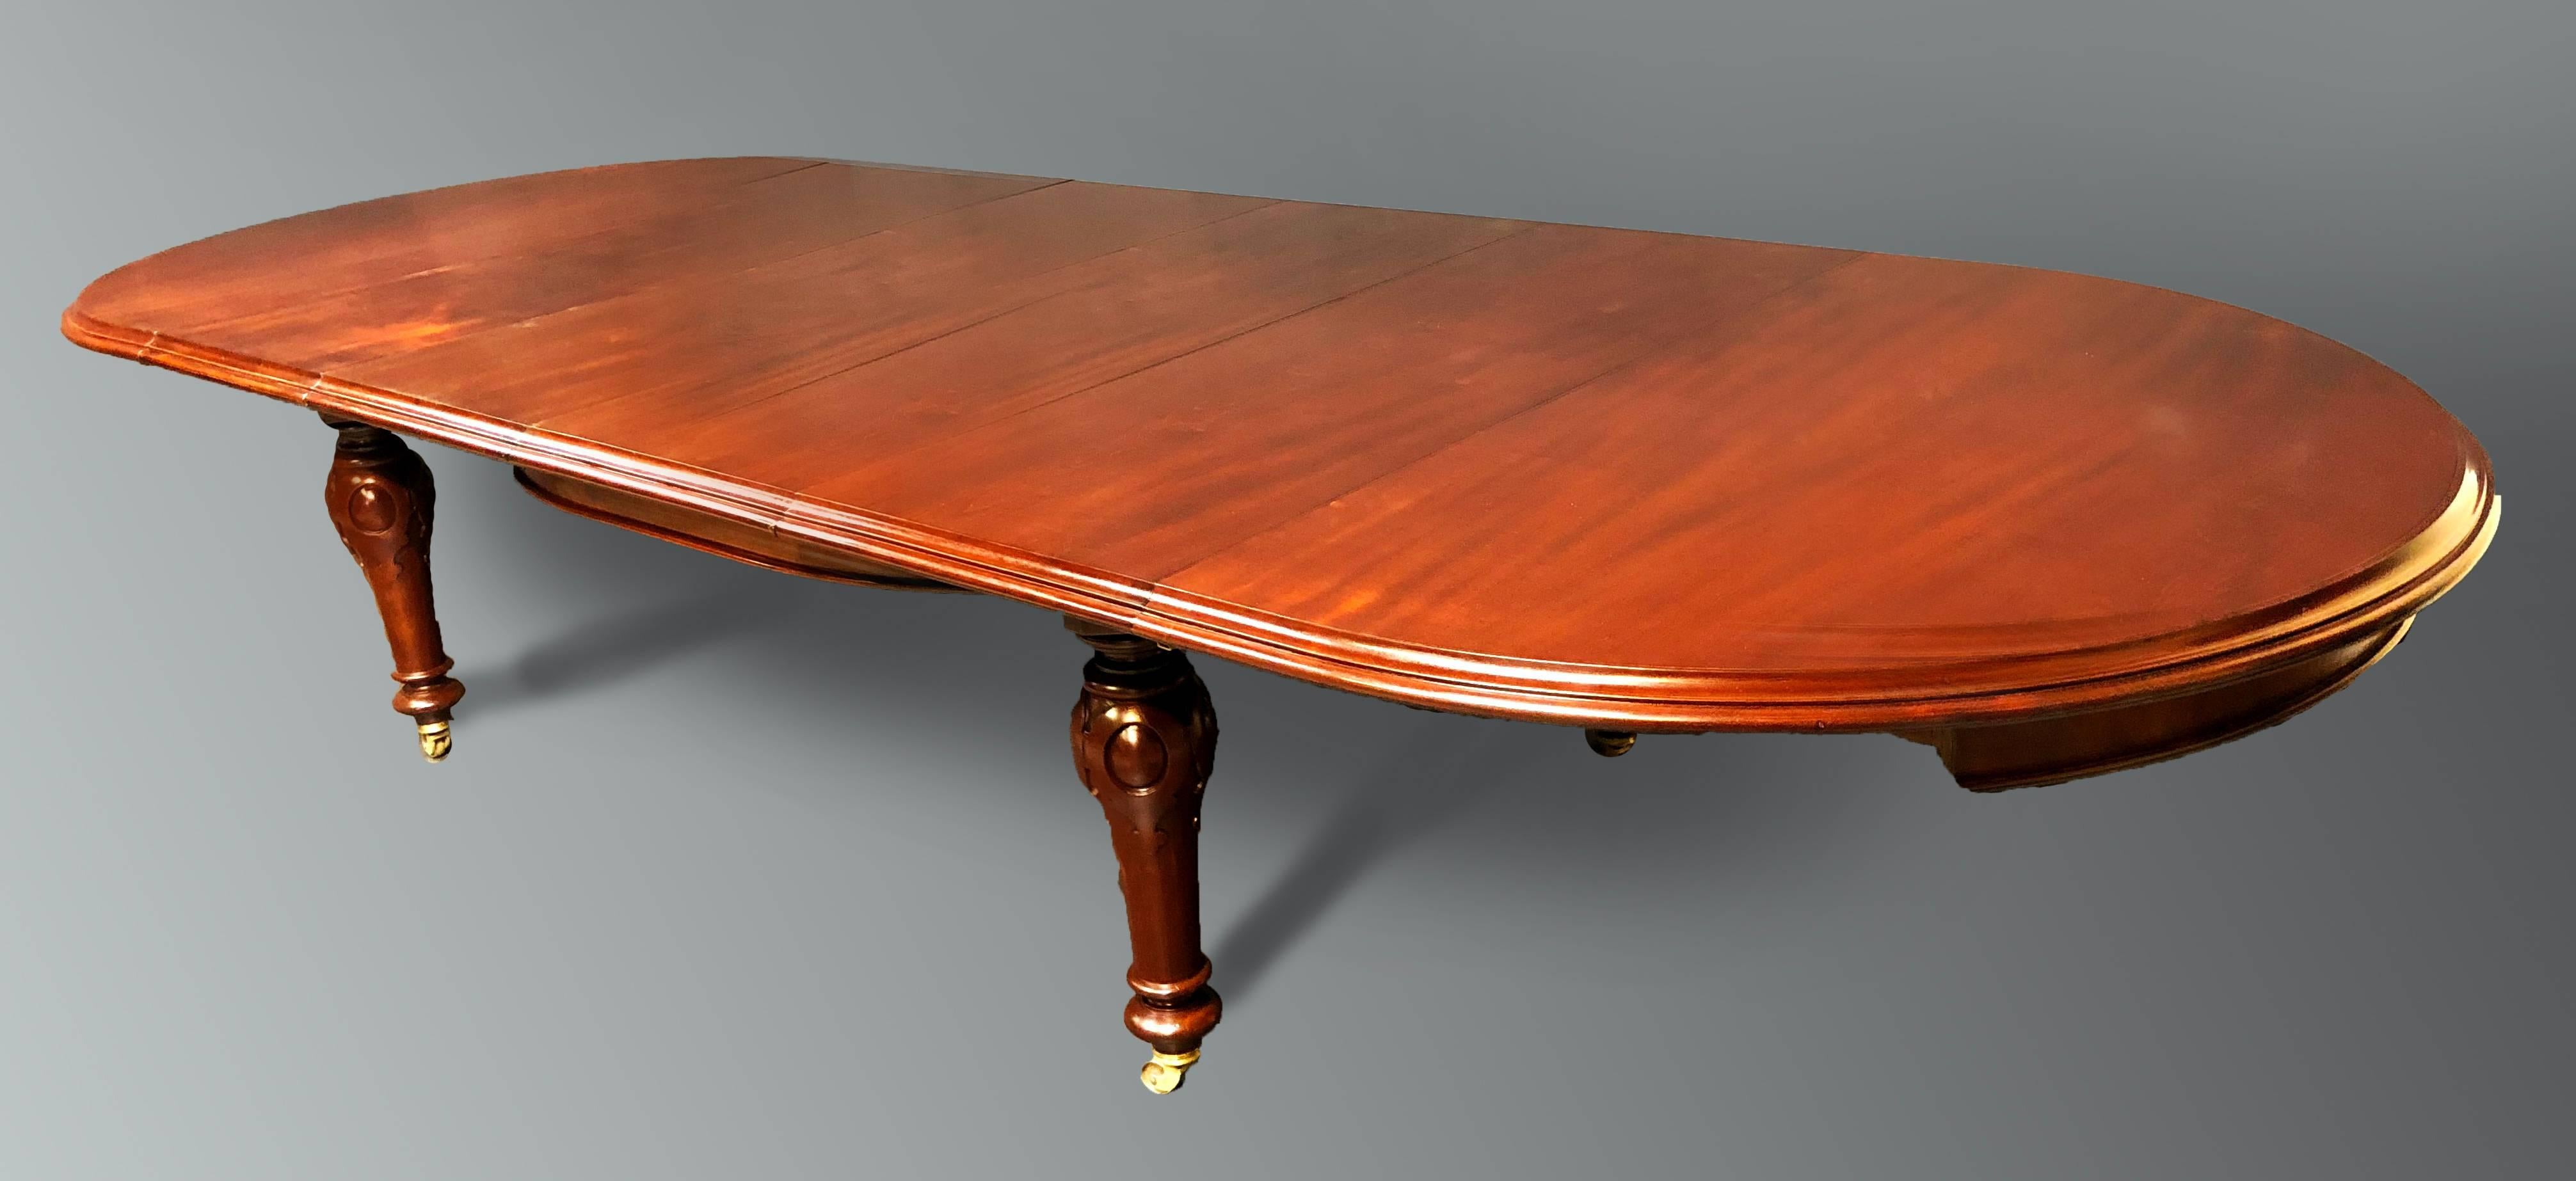 19th Century Large Dining Table Victorian Era with Easy Extension System Solid Mahogany